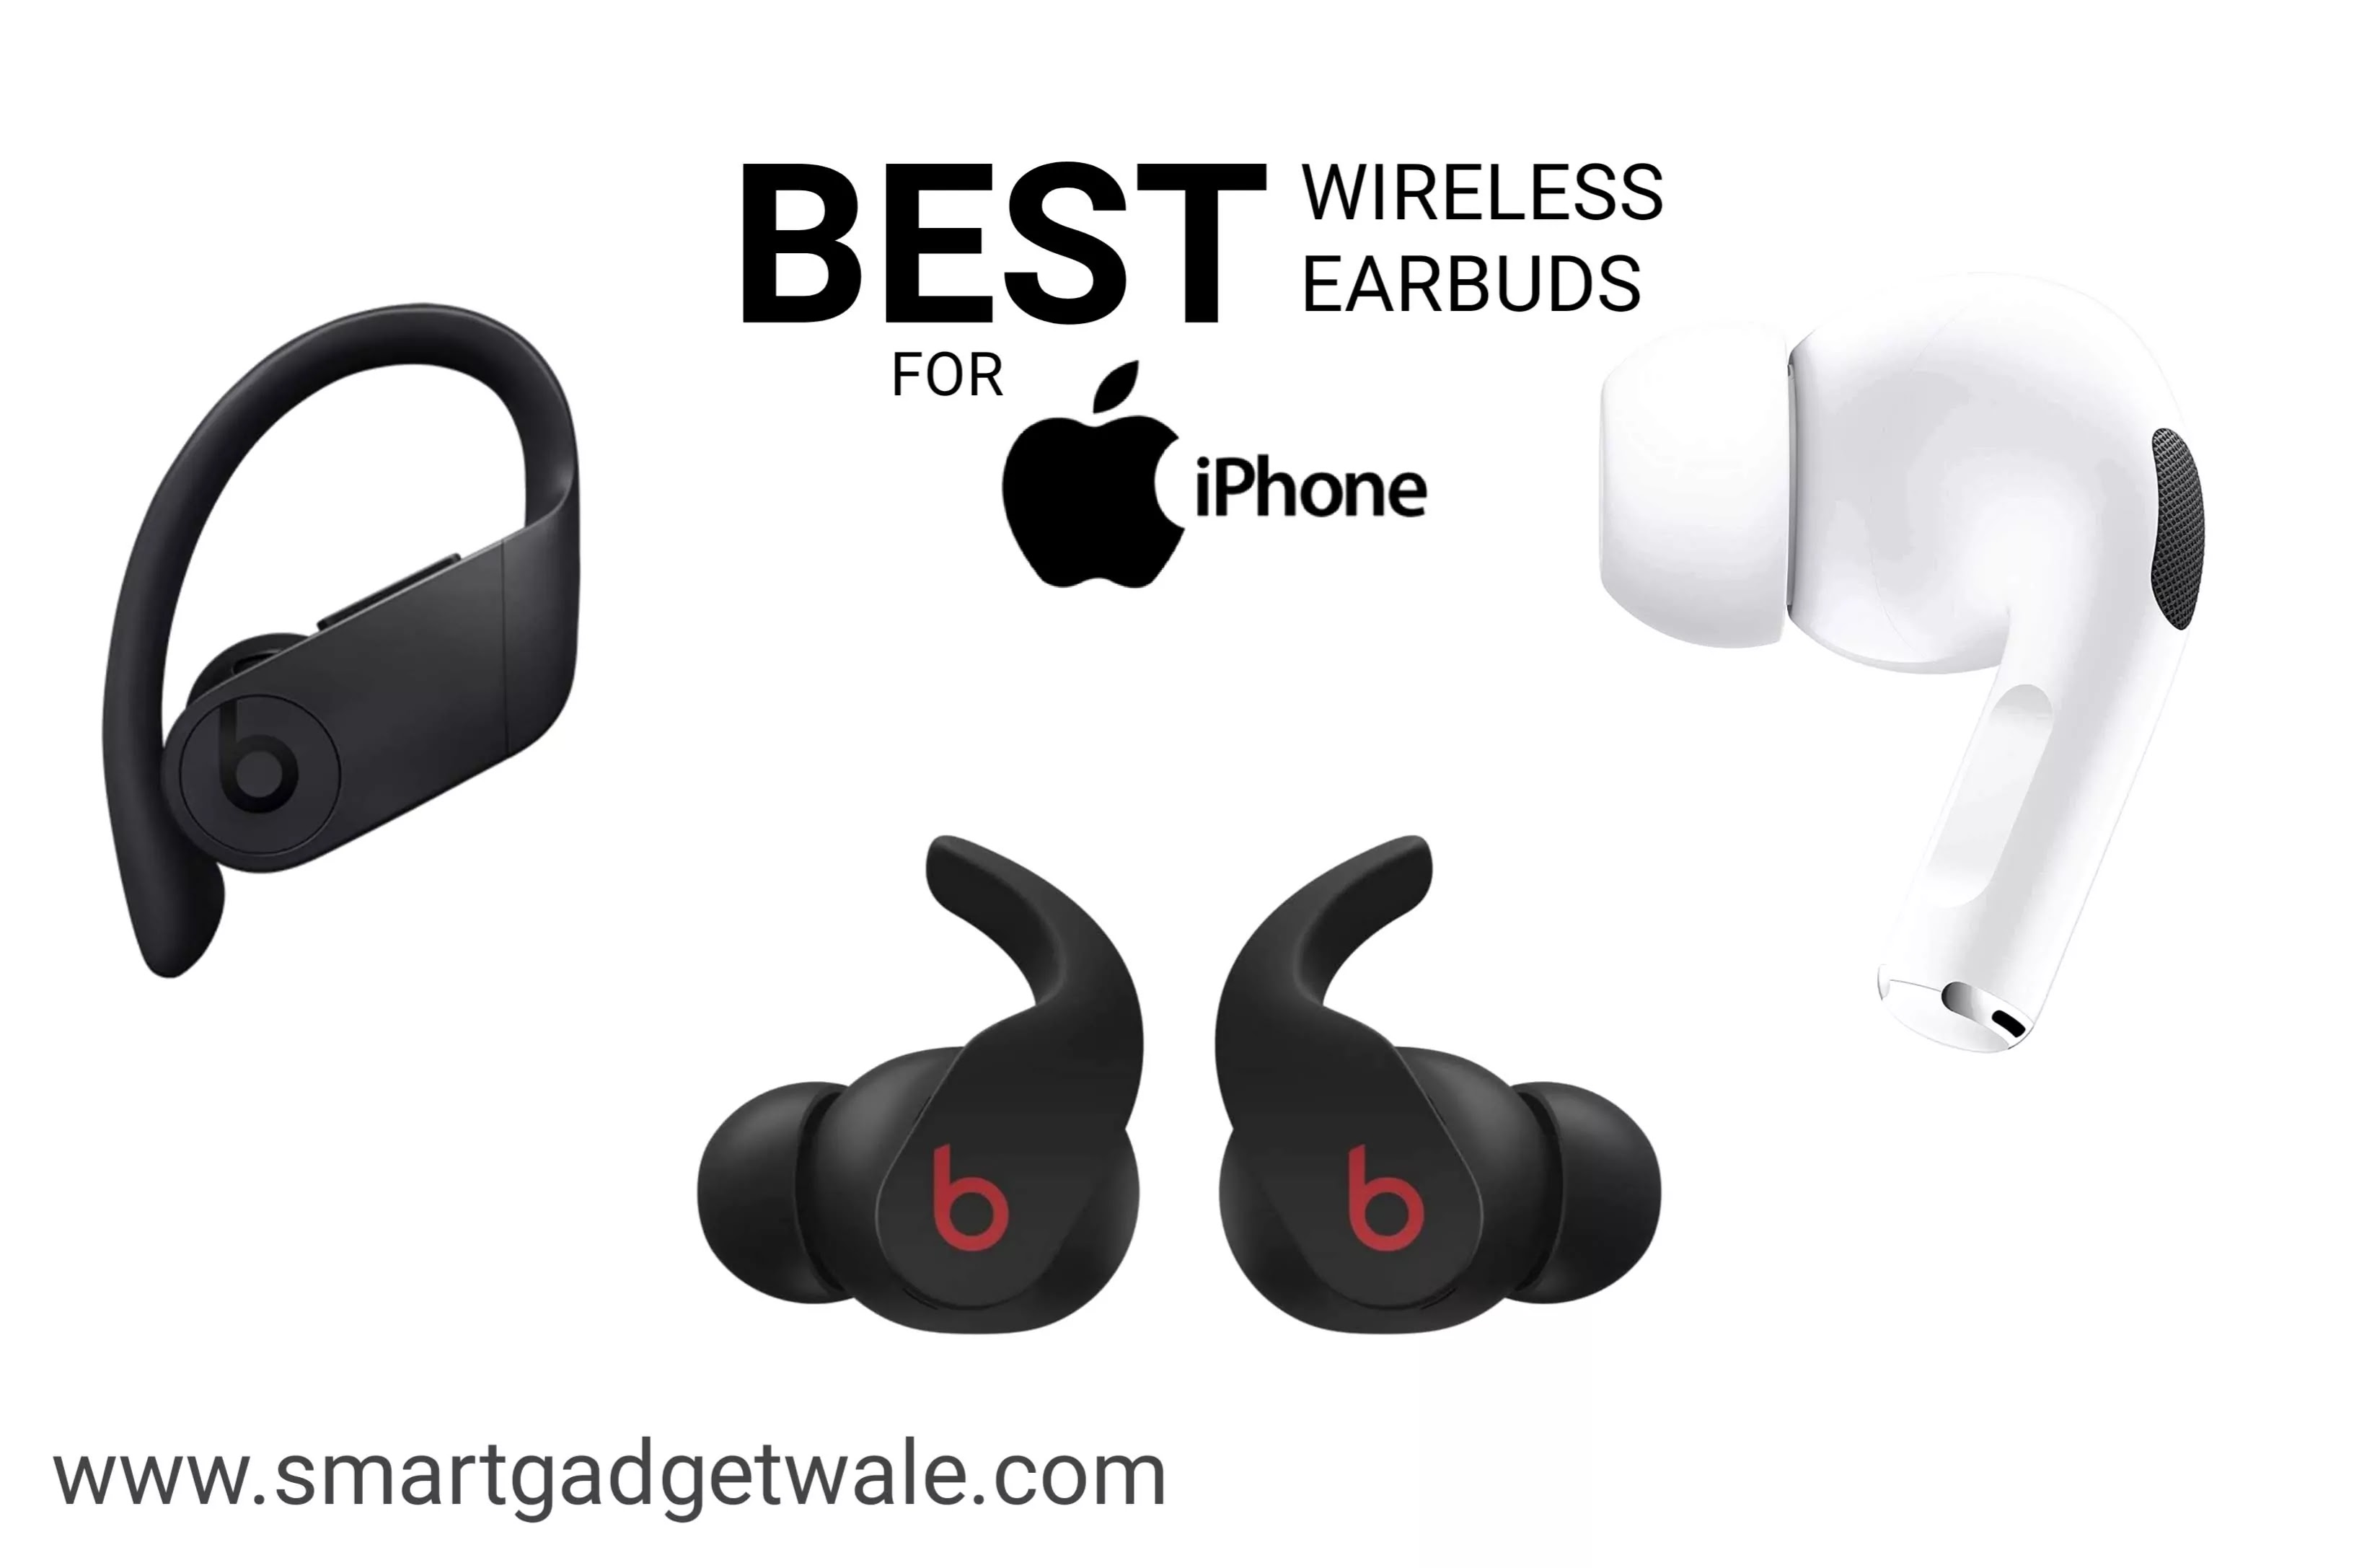 Best wireless earbuds for iphone